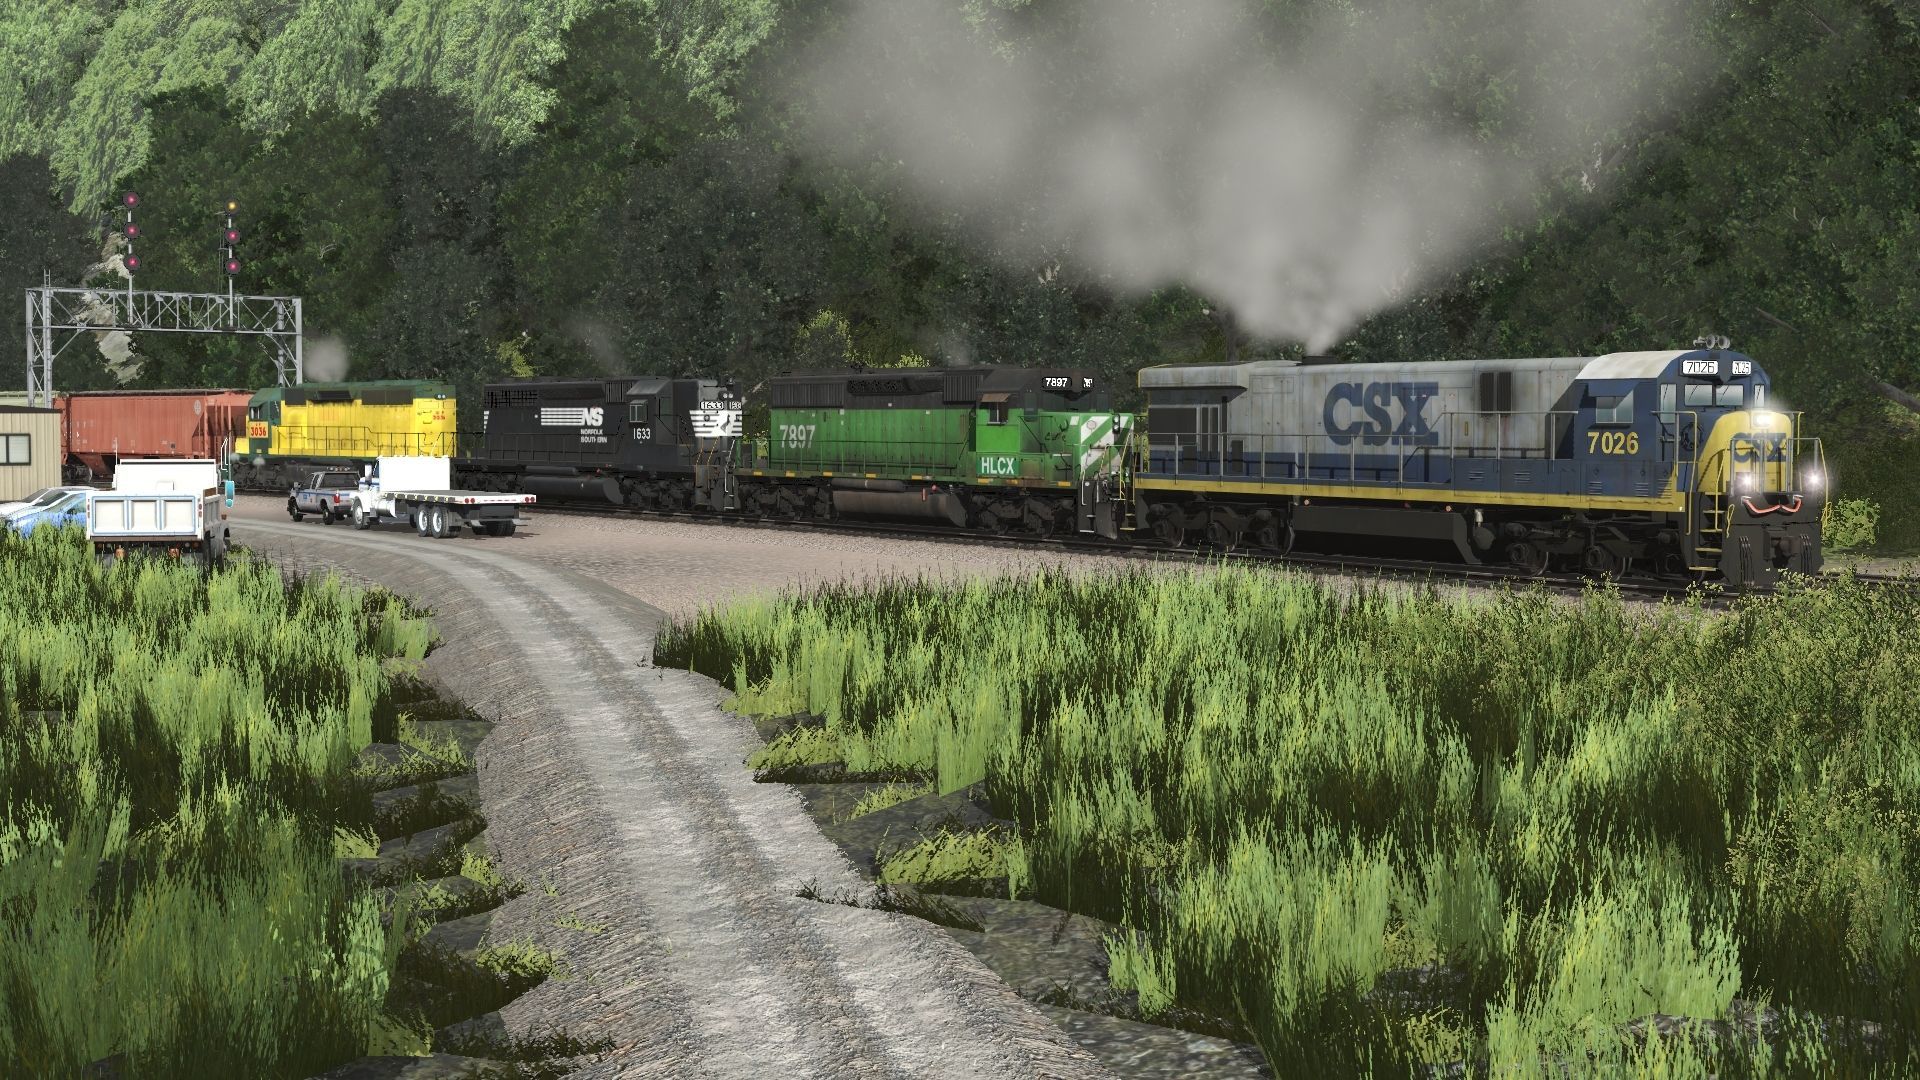 CSX-7026-belches-smoke-as-it-departs-the-yard-on-a-late-summer-afternoon.(1).jpg